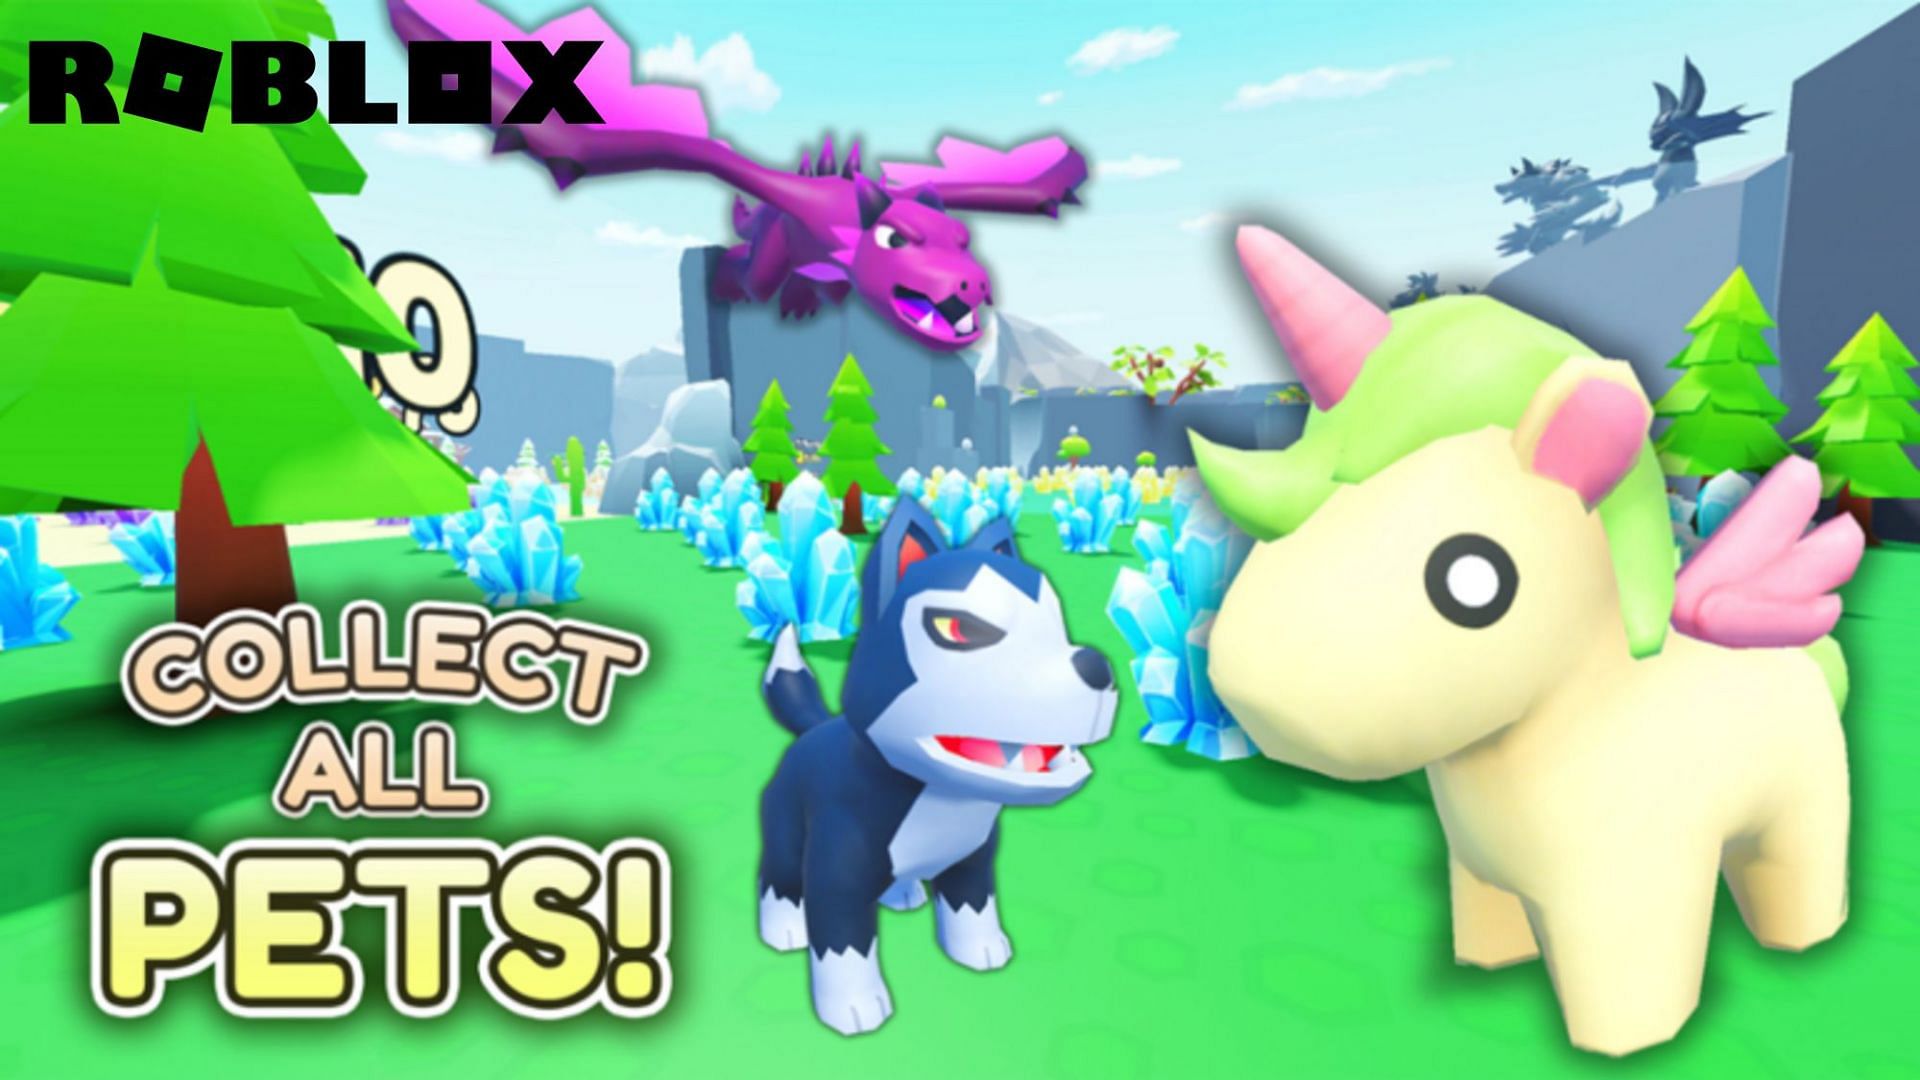 Codes to redeem free rewards in Roblox Collect All Pets (Image via Roblox)